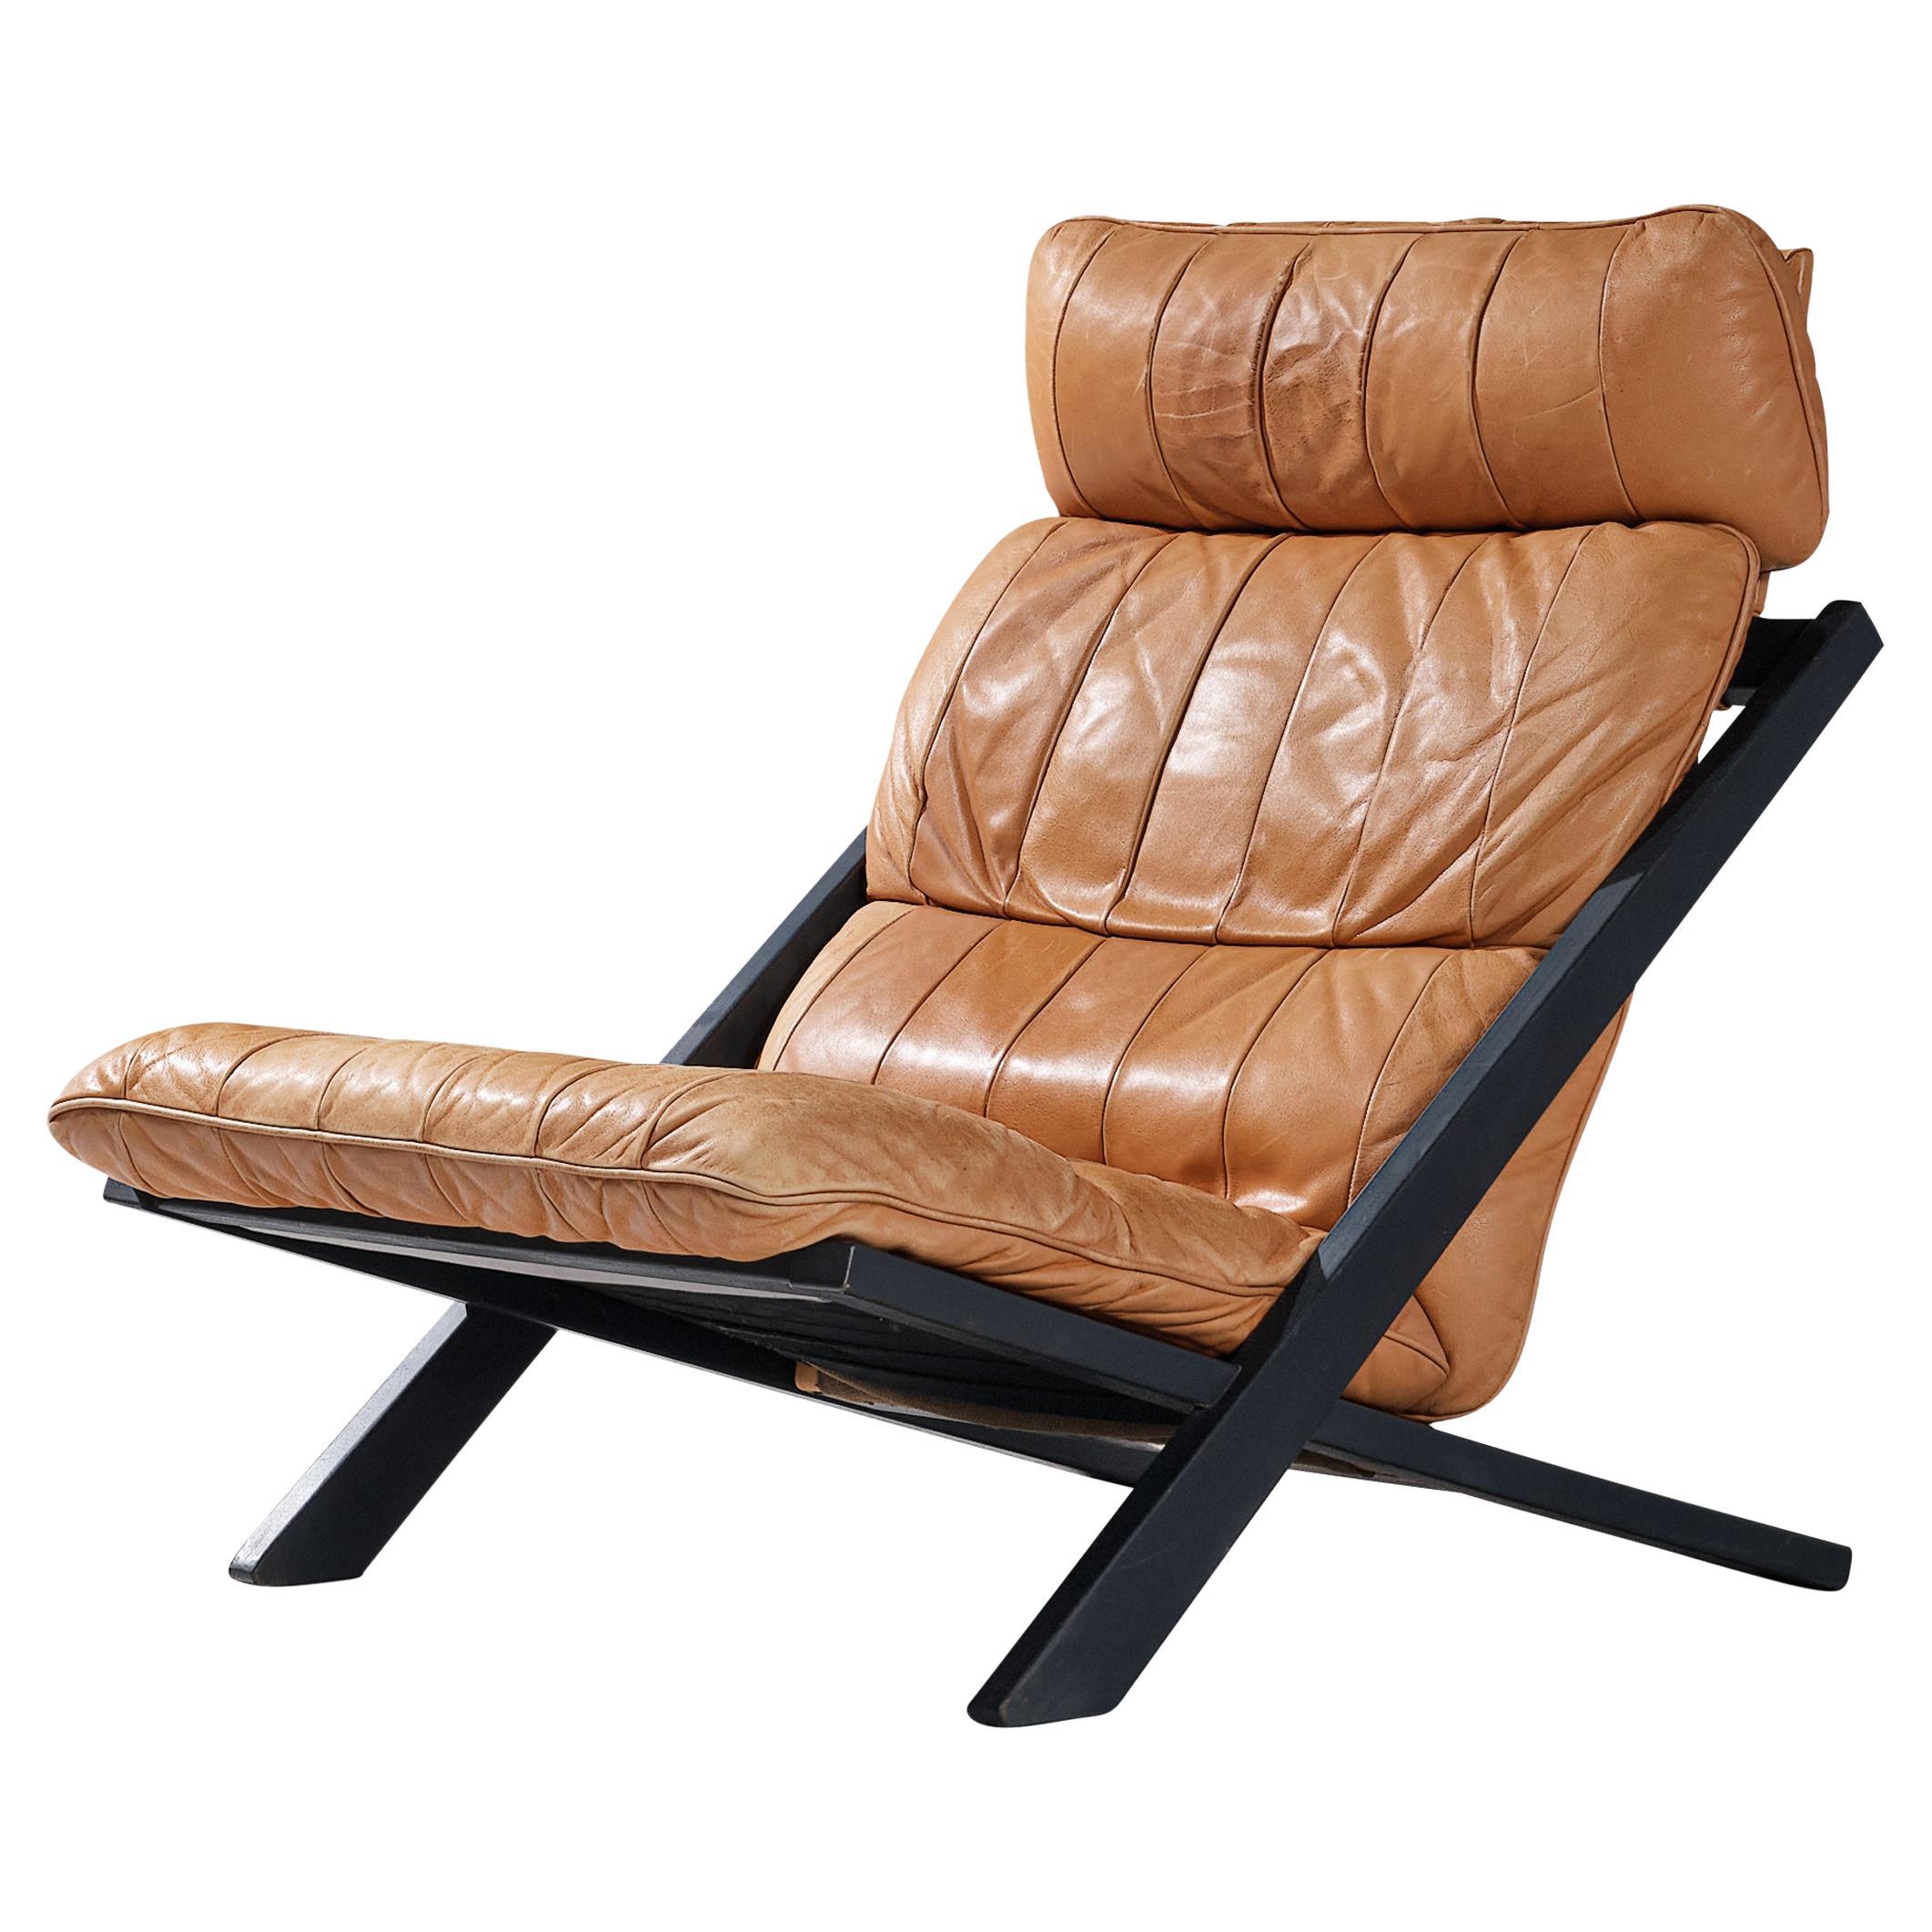 Ueli Berger for De Sede Lounge Chair in Cognac Leather For Sale